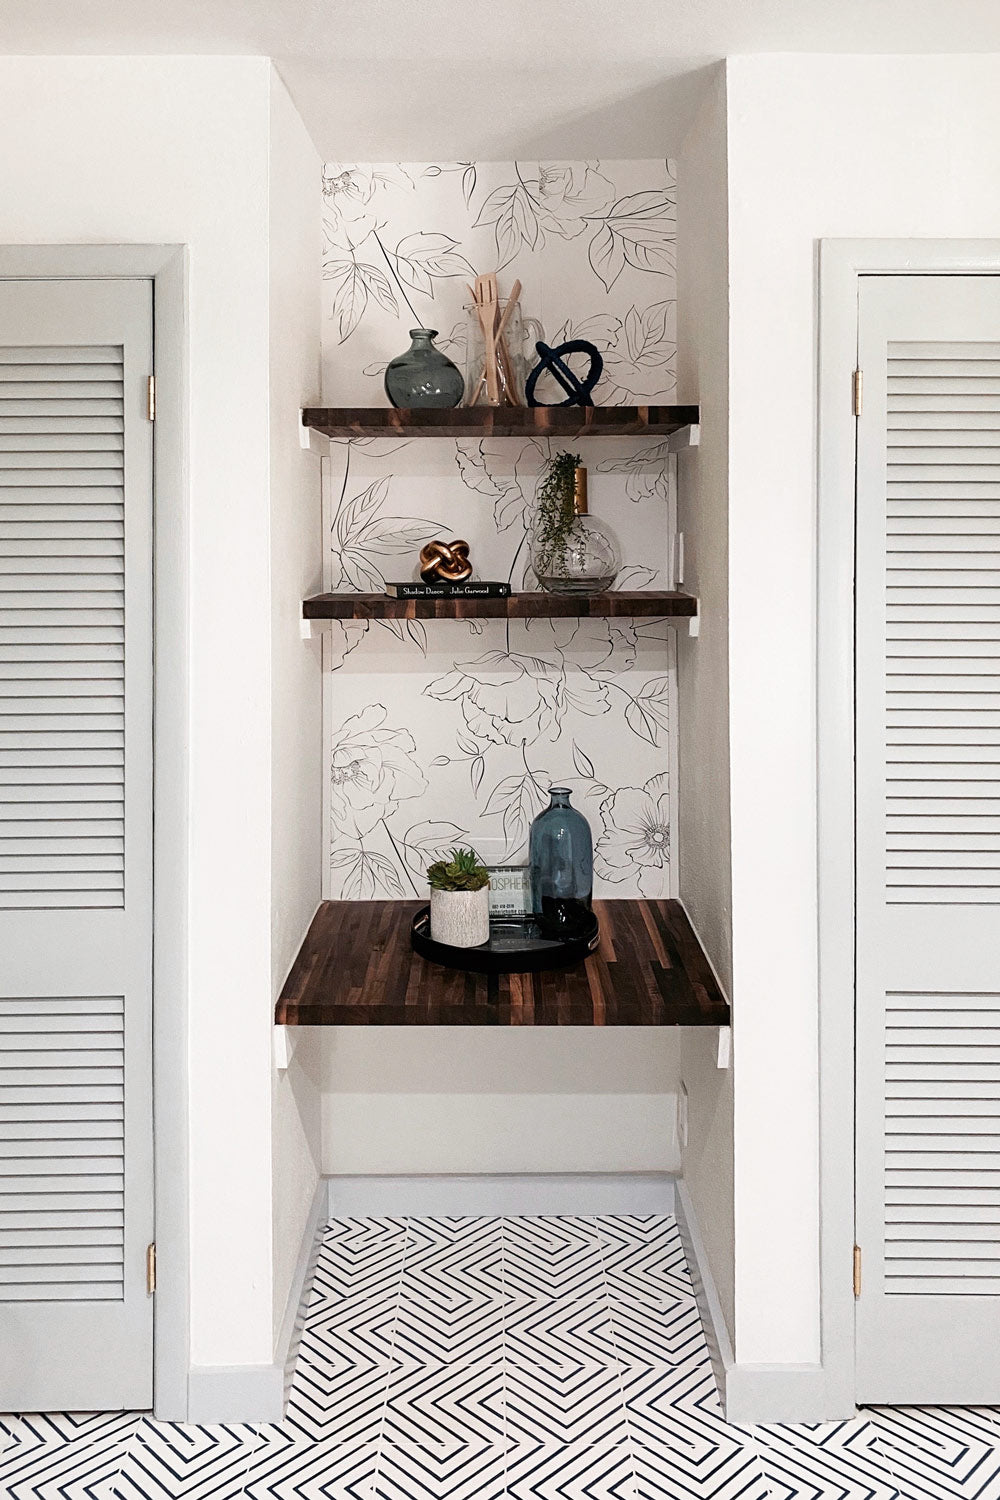 Delicate Dining room shelving with removable wallpaper